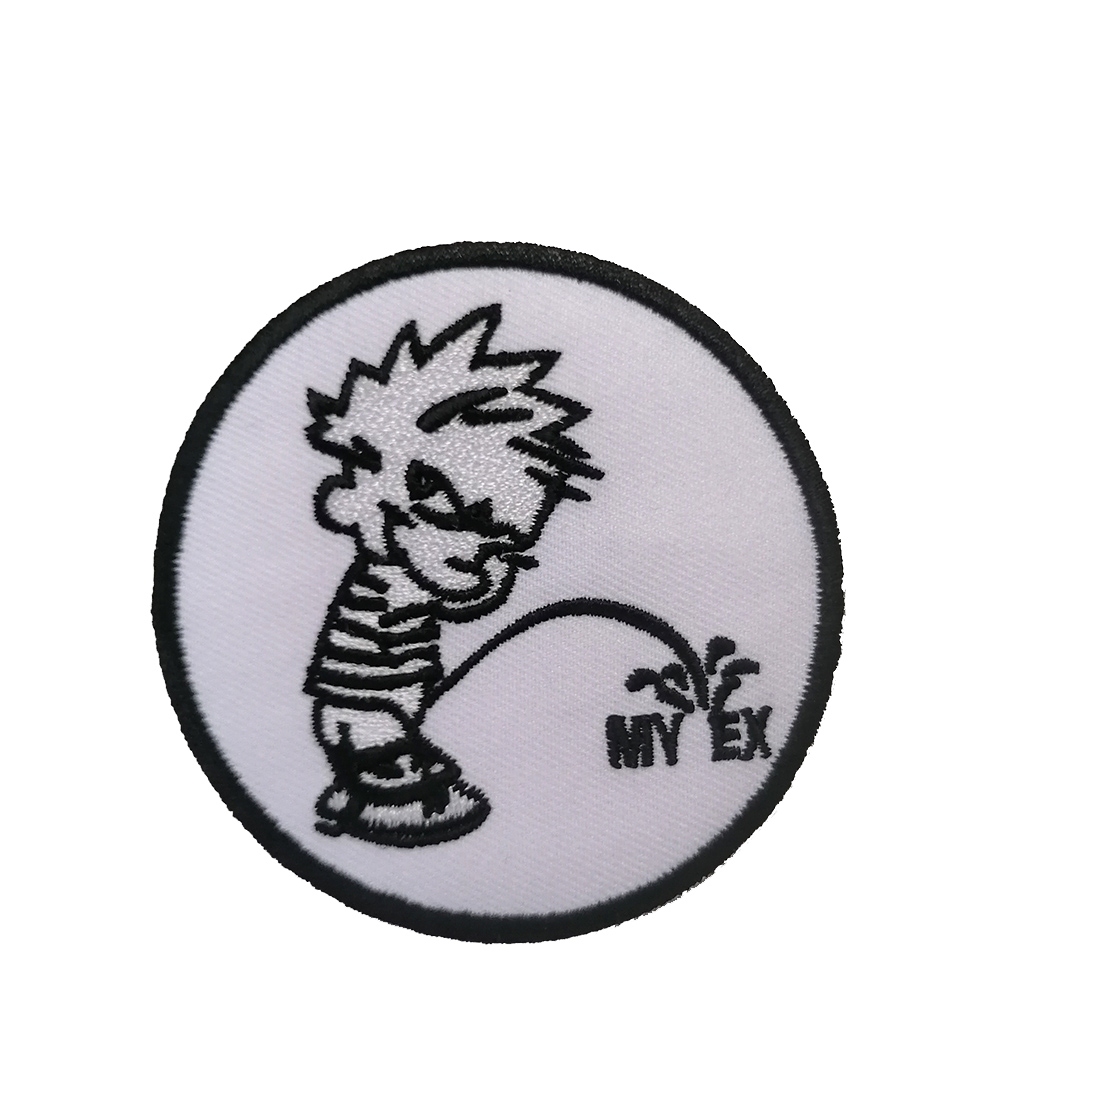 Embroidered Iron Patches Fun, Cartoon Embroidered Patches